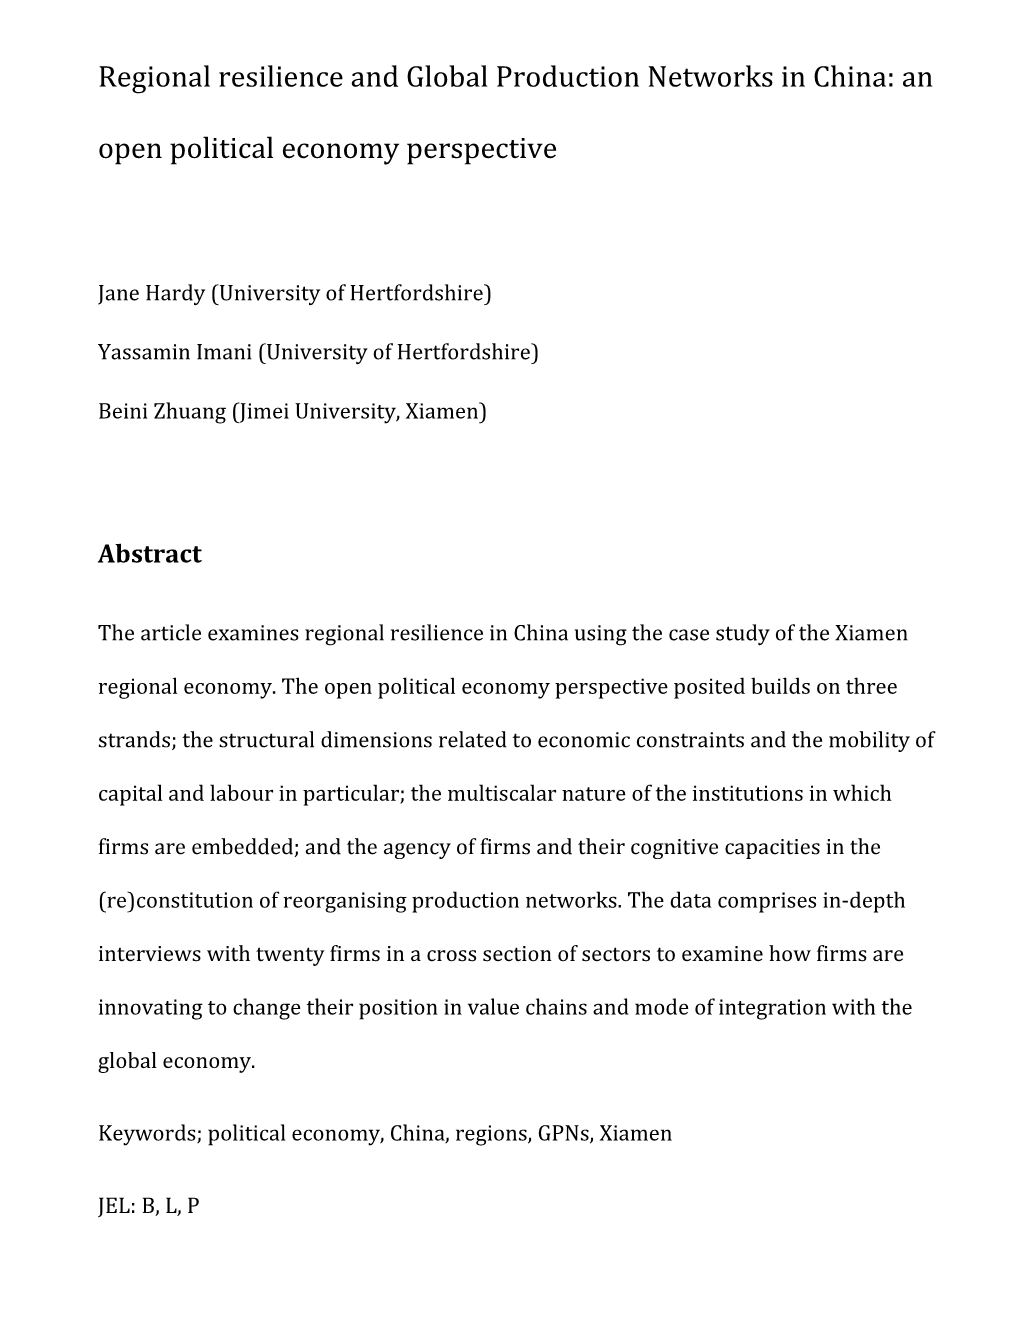 Regional Resilience and Global Production Networks in China: an Open Political Economy